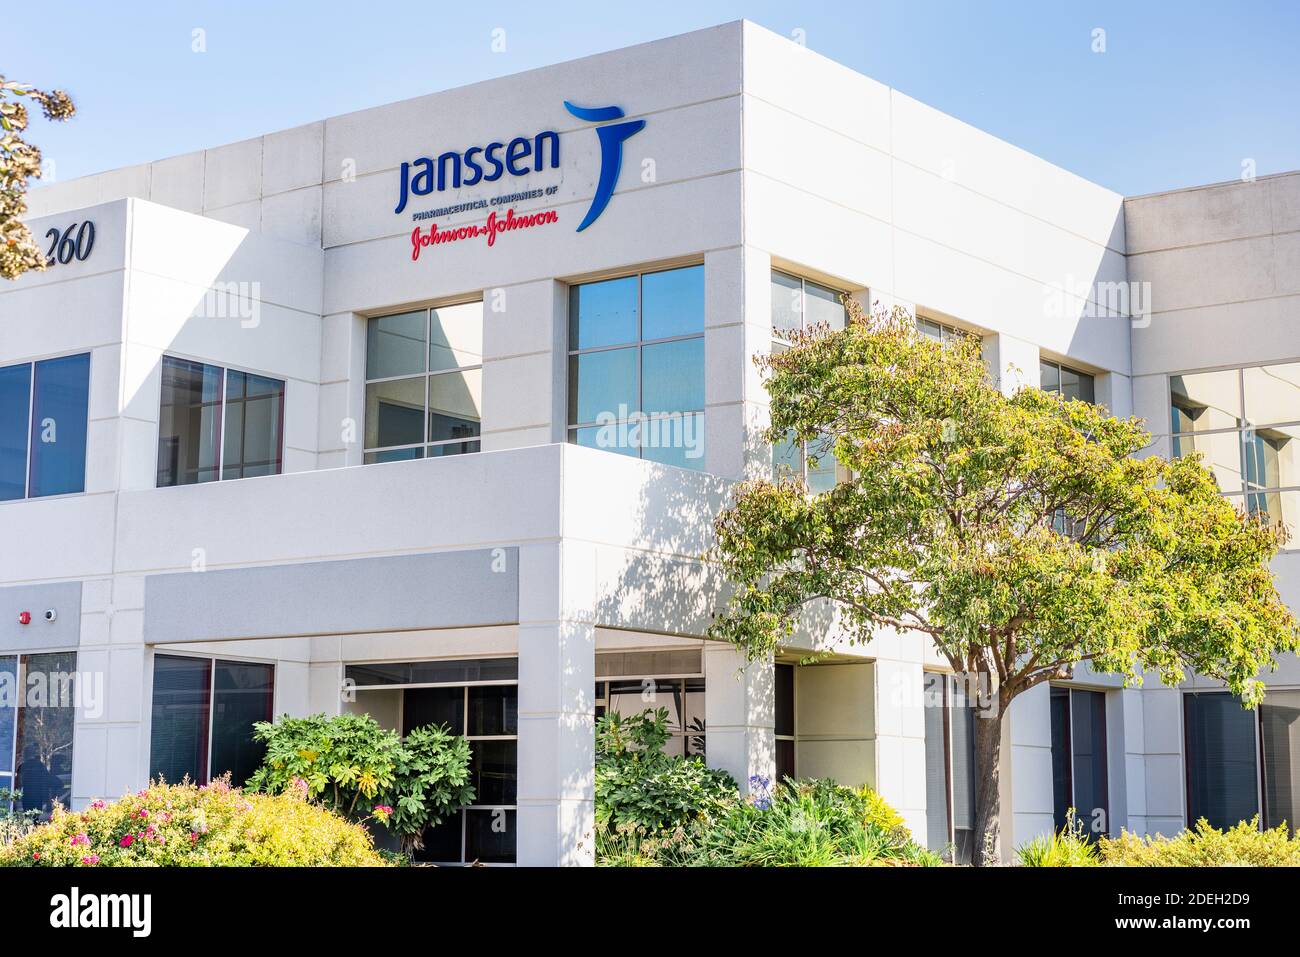 Sep 21, 2020 South San Francisco / CA / USA - Janssen headquarters in Silicon Valley; Janssen Research and Development, part of Johnson & Johnson, is Stock Photo